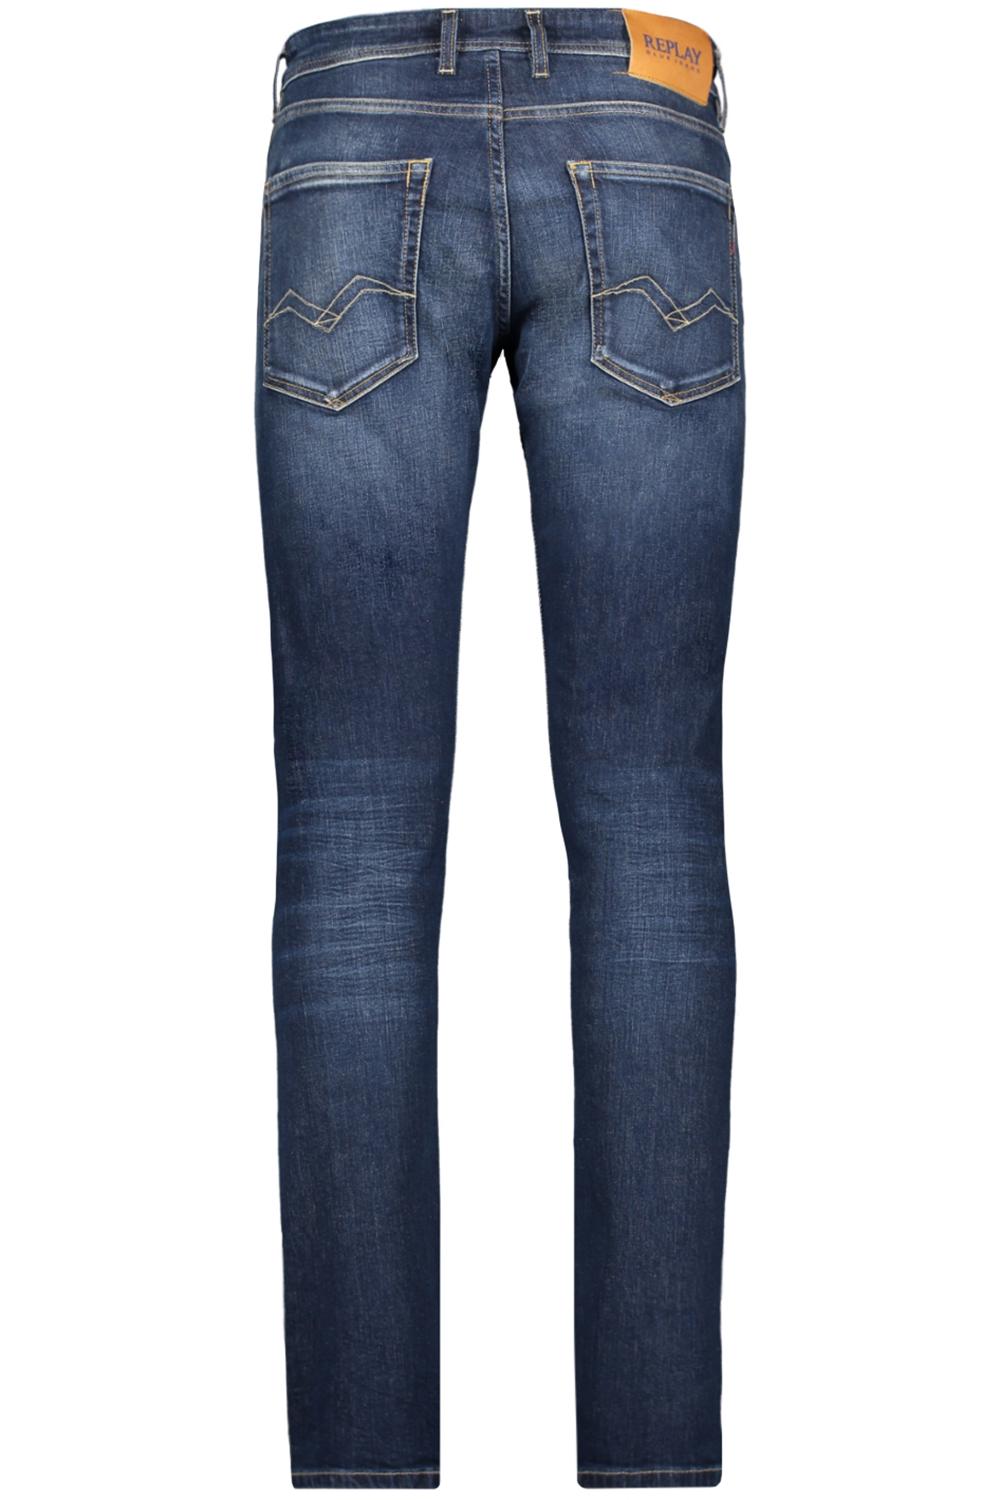 grover ma972 000 573560 replay jeans 007